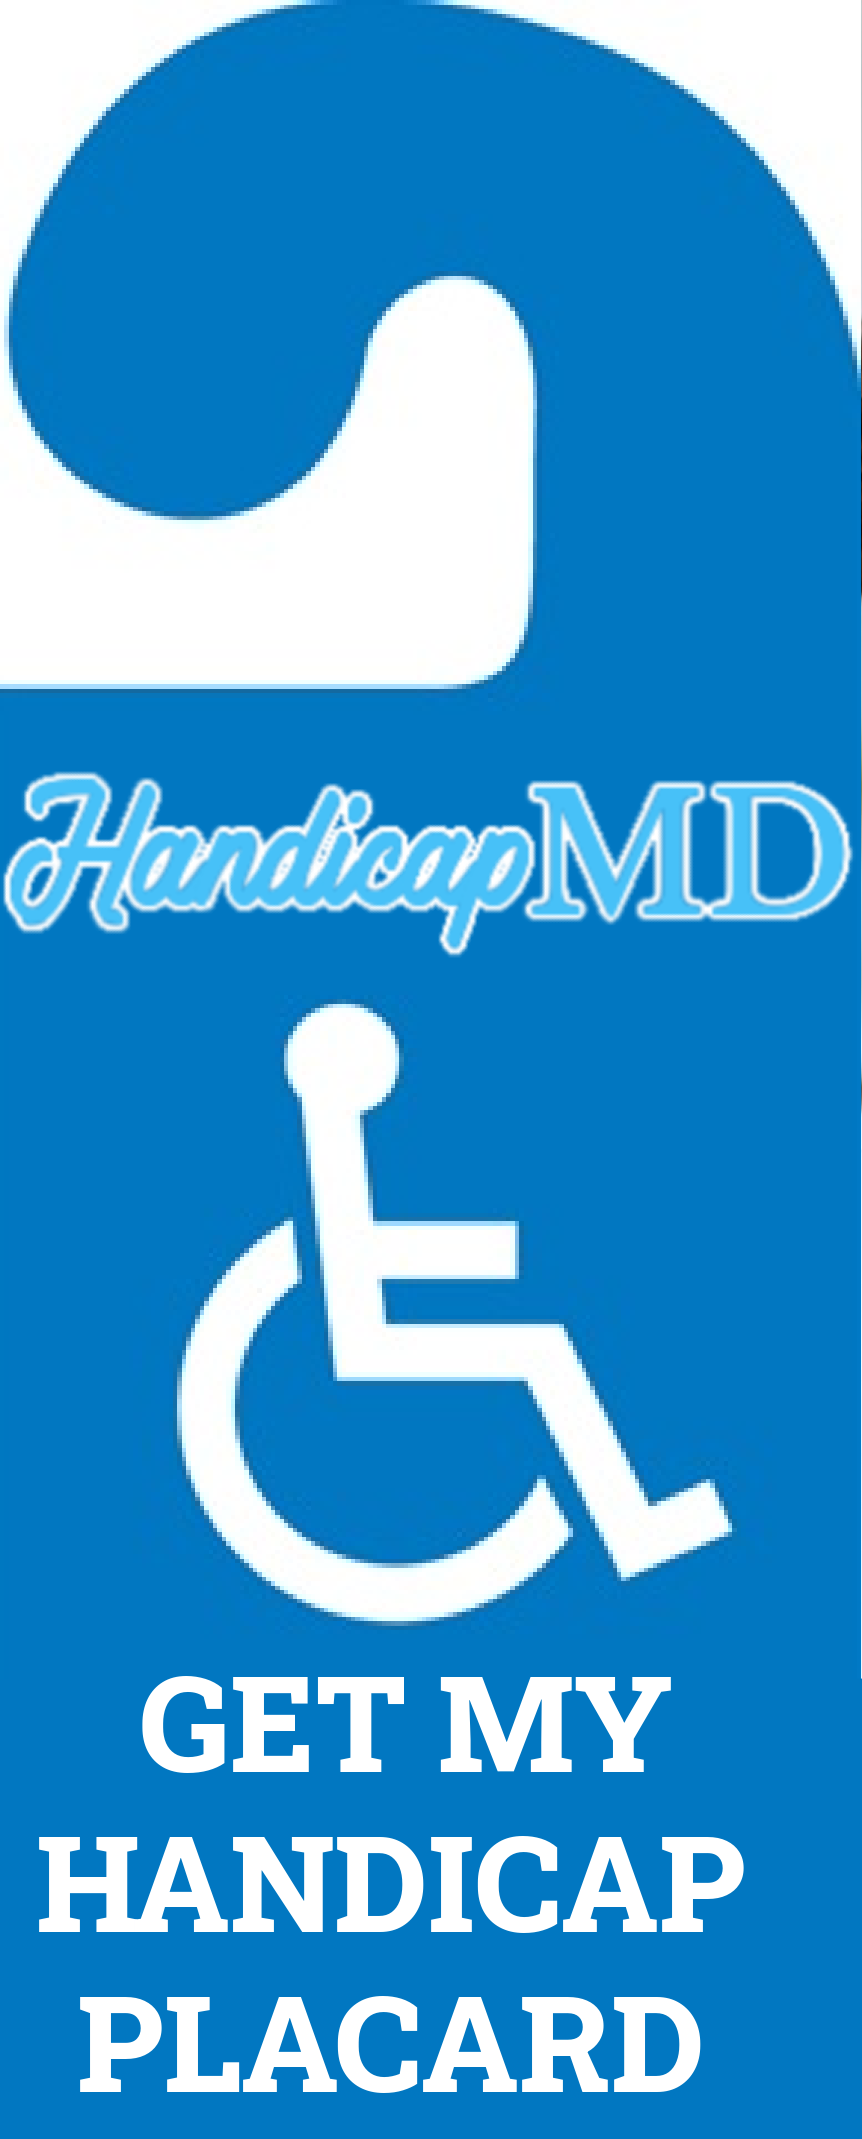 Handicap Placard Violations and Penalties in California: What You Need to Know